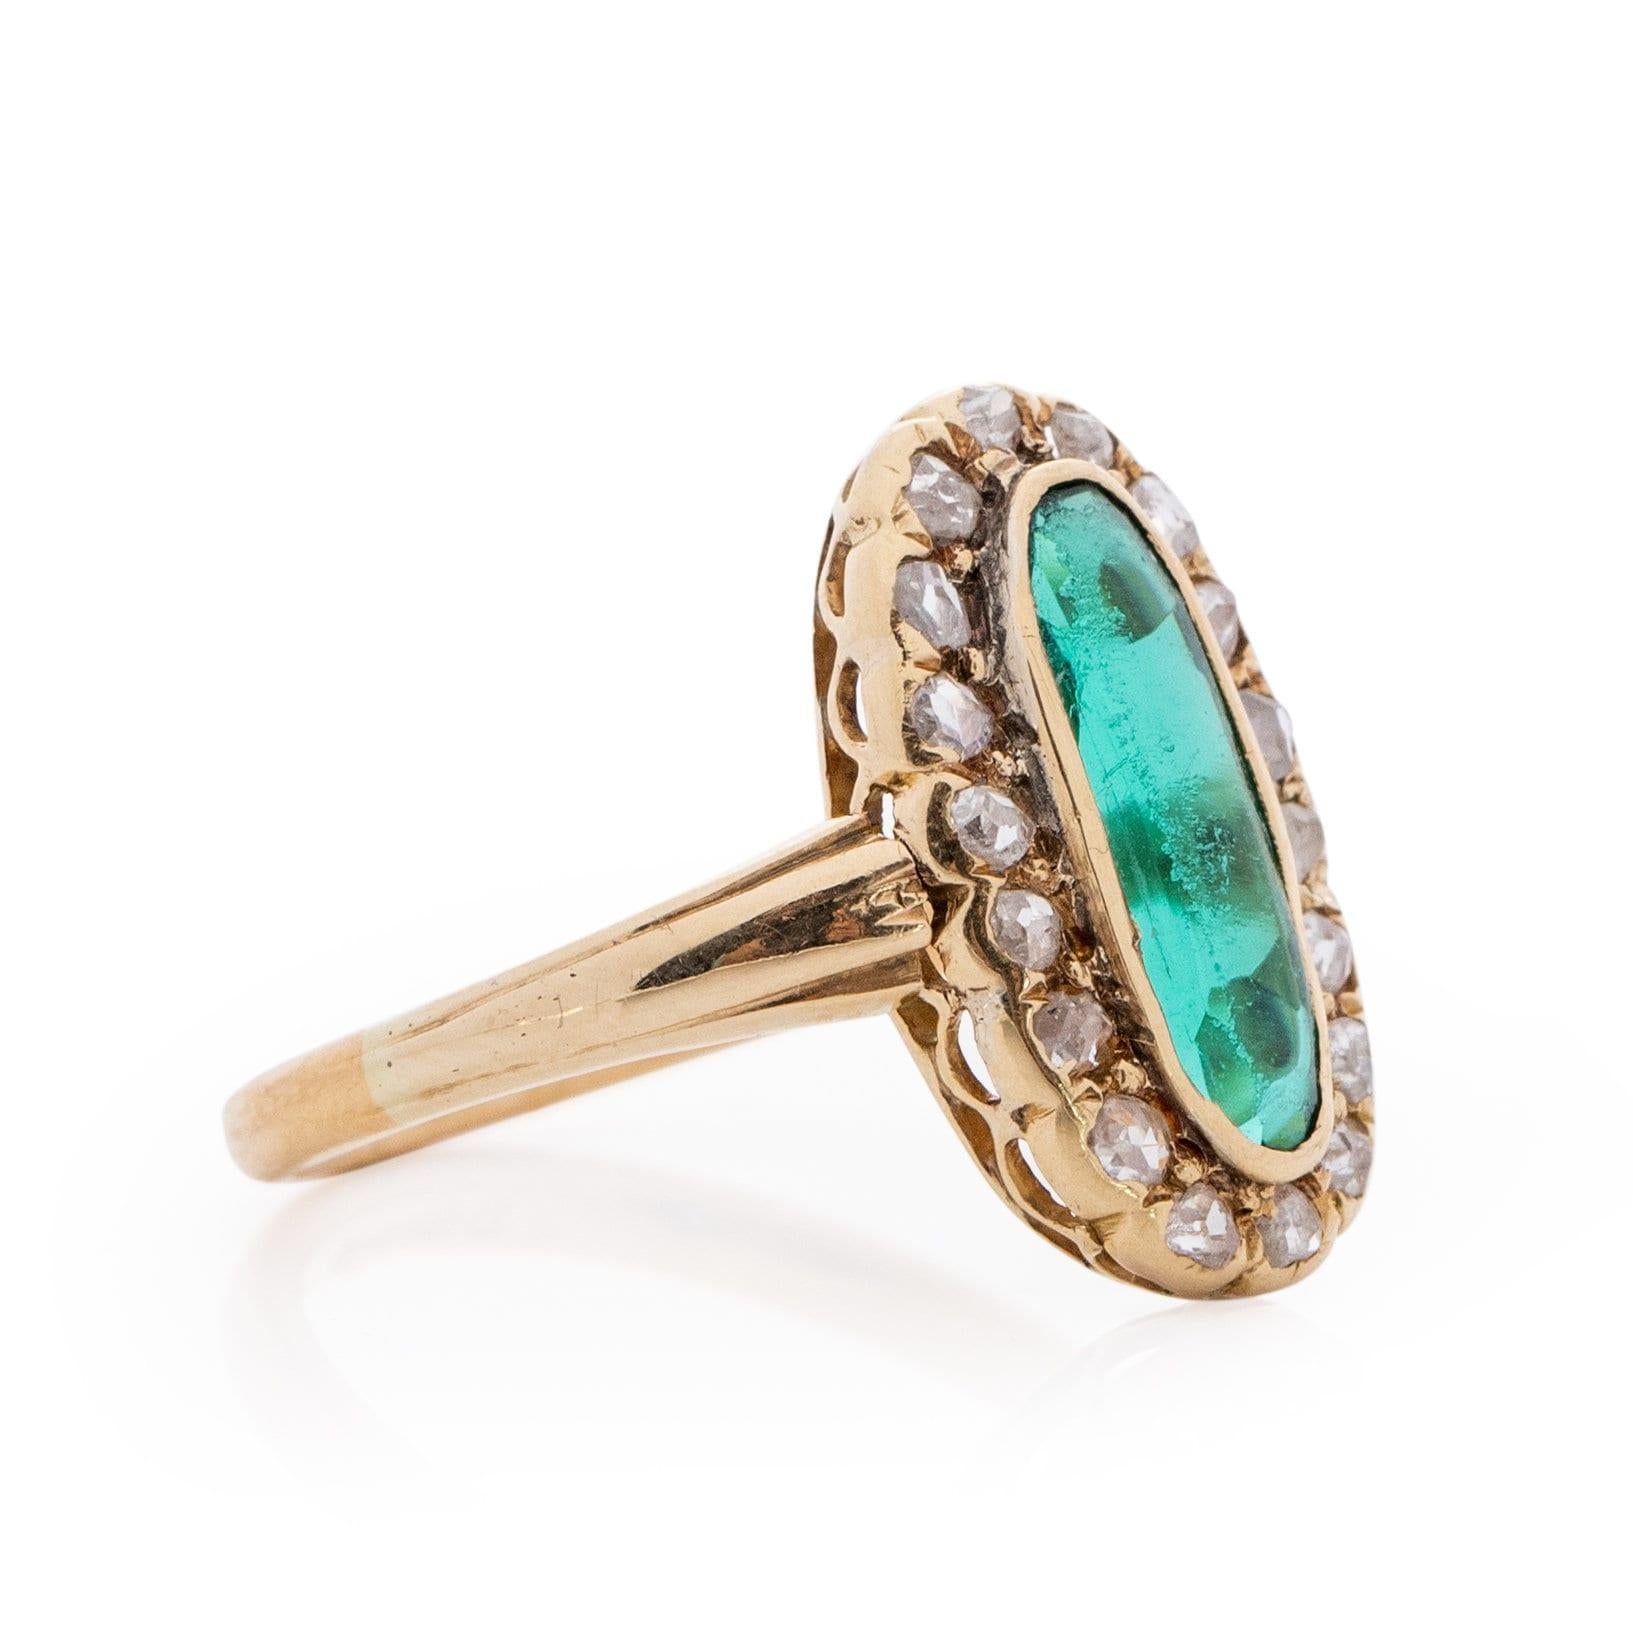 This showstopper is simple, timeless and elegant all at once. Crafted in beautiful 22K Yellow Gold sits a breathtaking elongated green gem, the hue of the gem is vibrant and full of life. Surrounding the gem is a halo of 18 single cut diamonds,